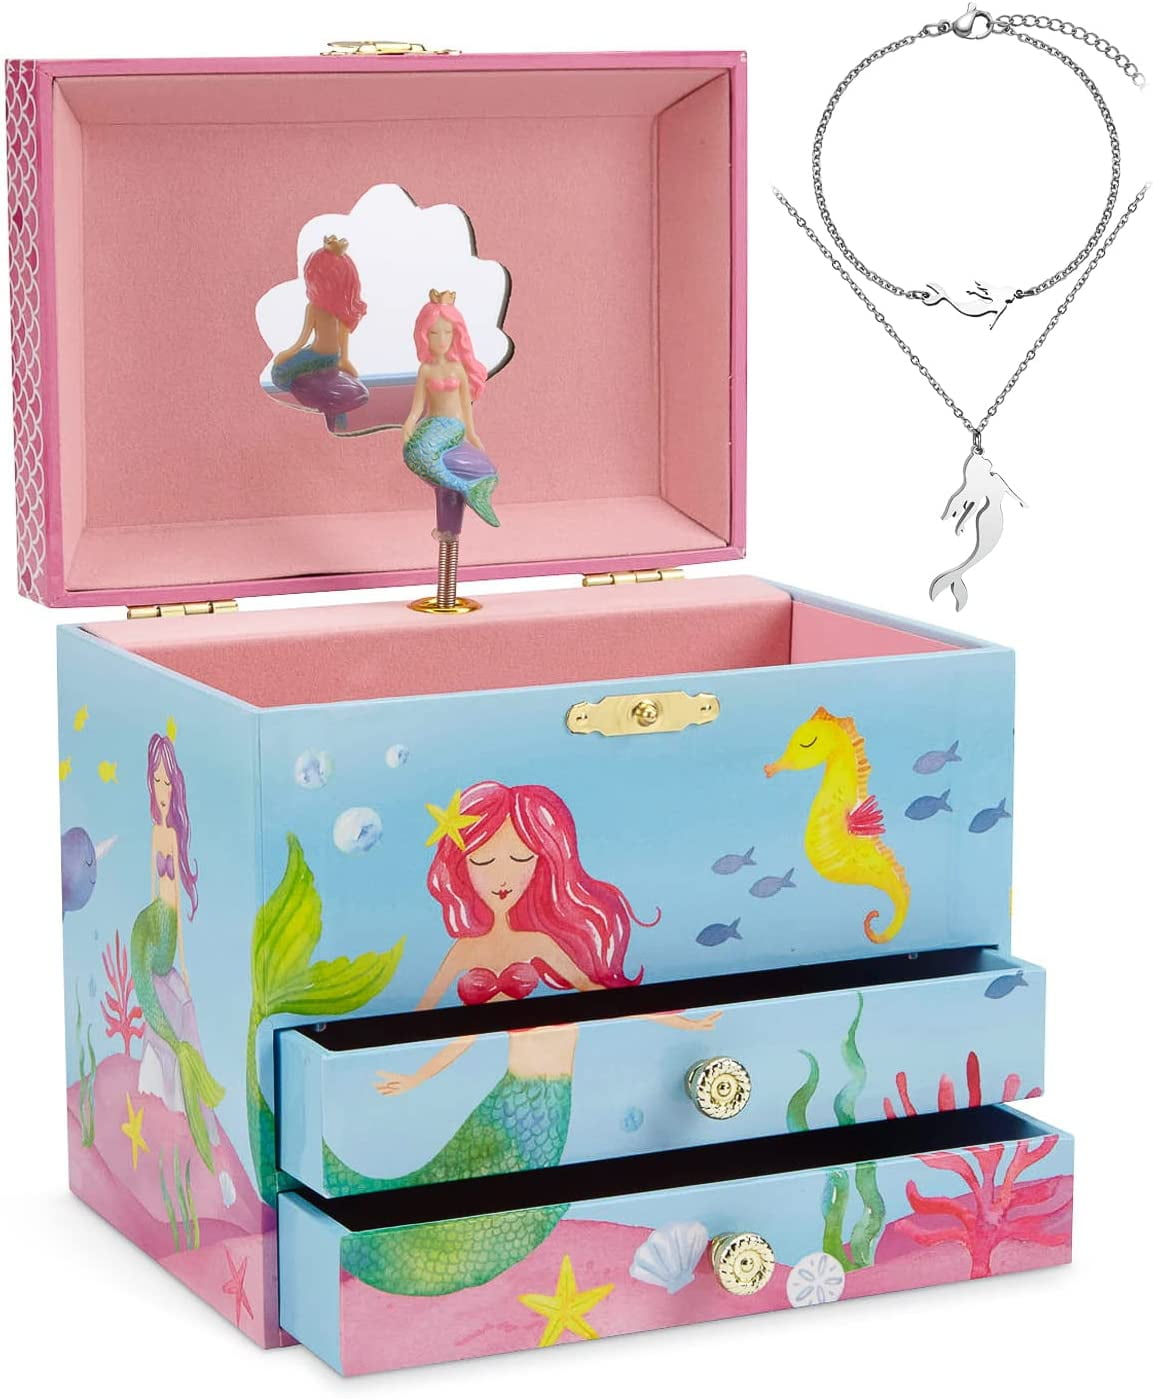  Mermaid Jewelry Box DIY Kits for Kids - Make Your Own Wooden  Jewelry Box for Girls, Beautiful Mermaid Crafts with This Personalized  Jewlery Box, Perfect Crafts for Girls Ages 6-8 and